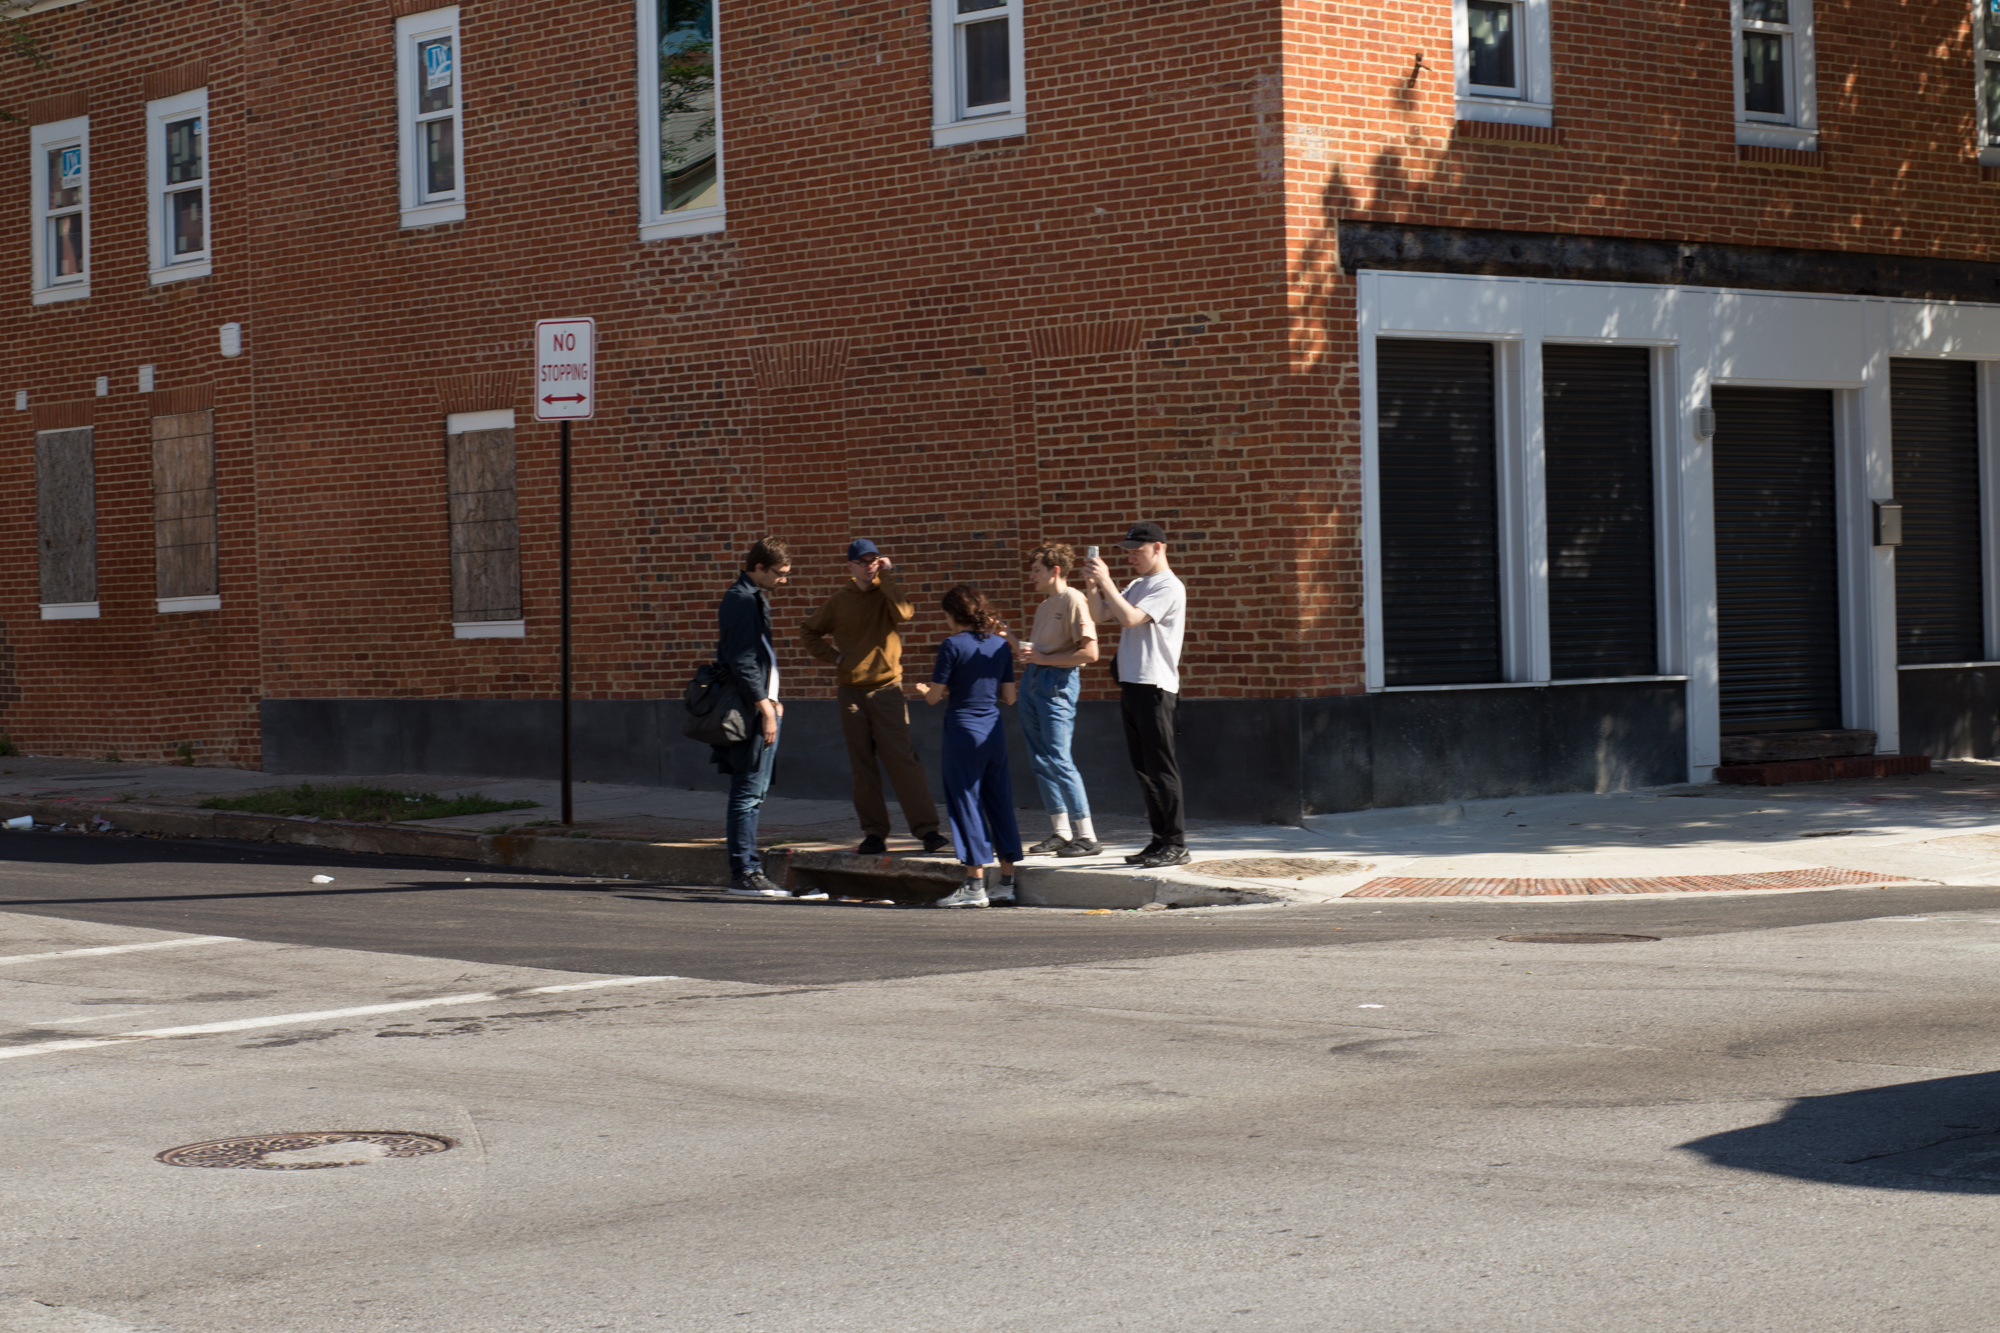 Five people stand on a street corner in front of a brick building; one takes a photo with his phone